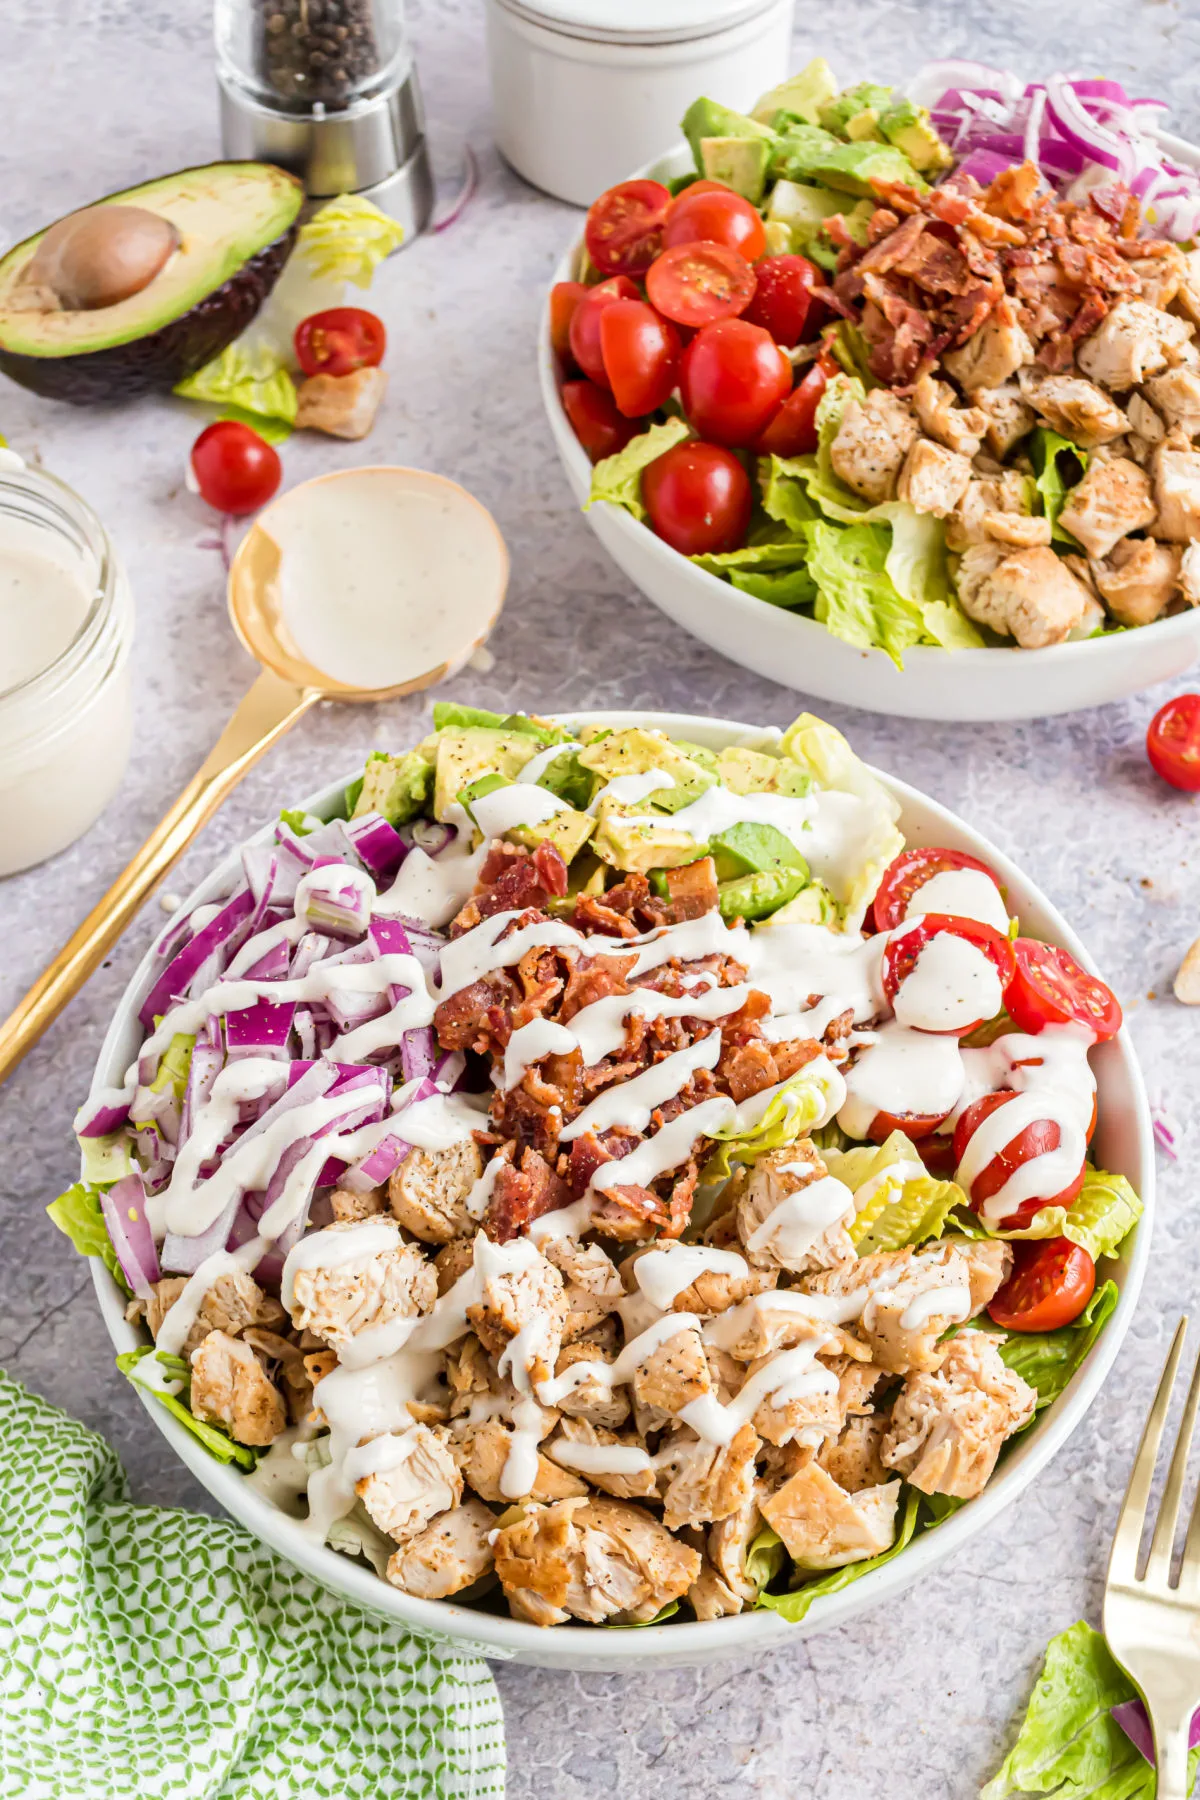 Chicken bacon salad drizzled with ranch dressing.